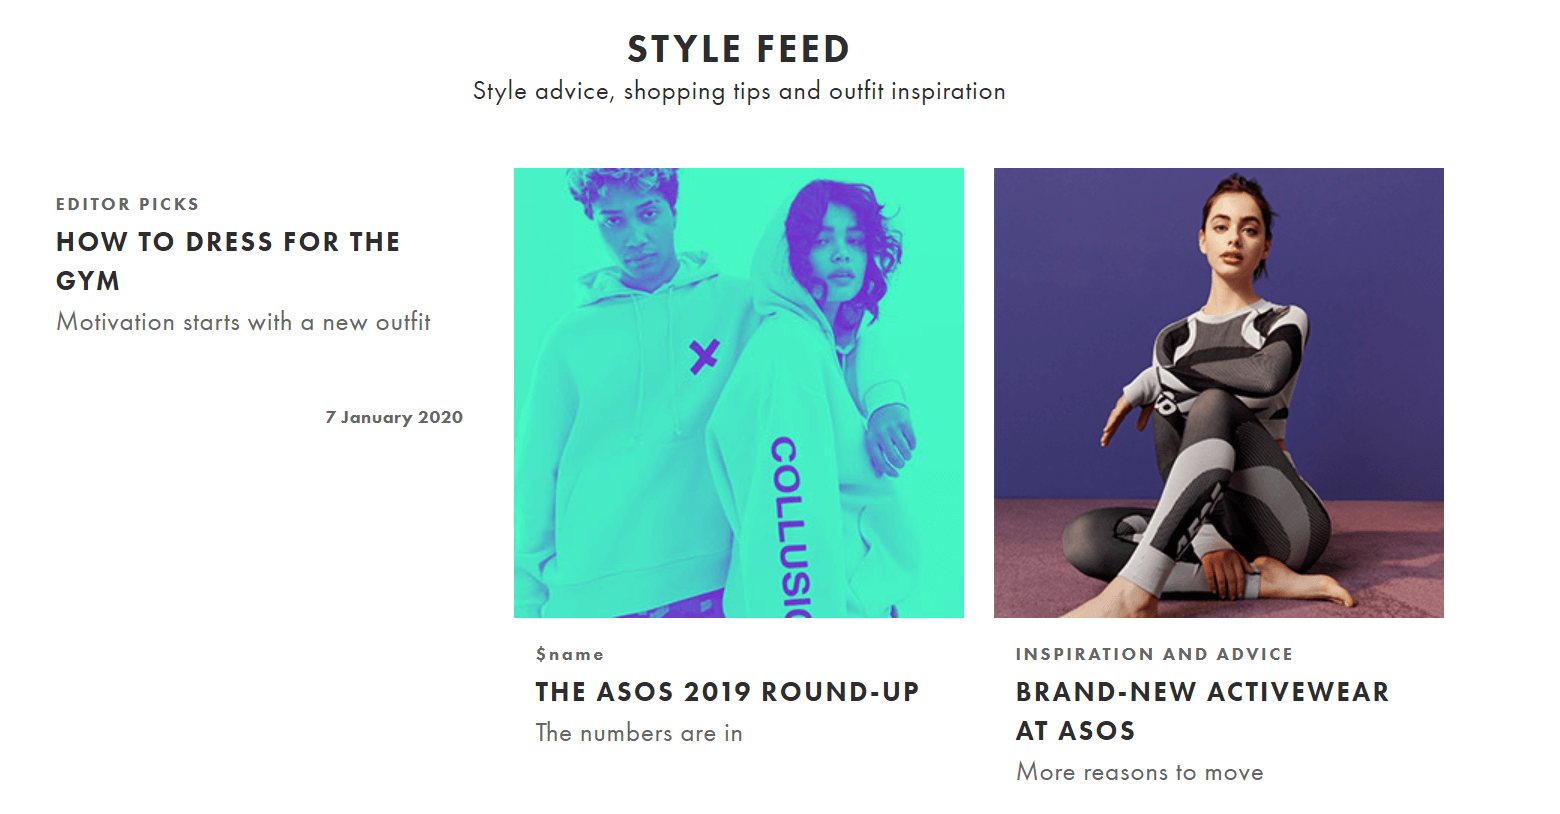 asos ecommerce content marketing examples